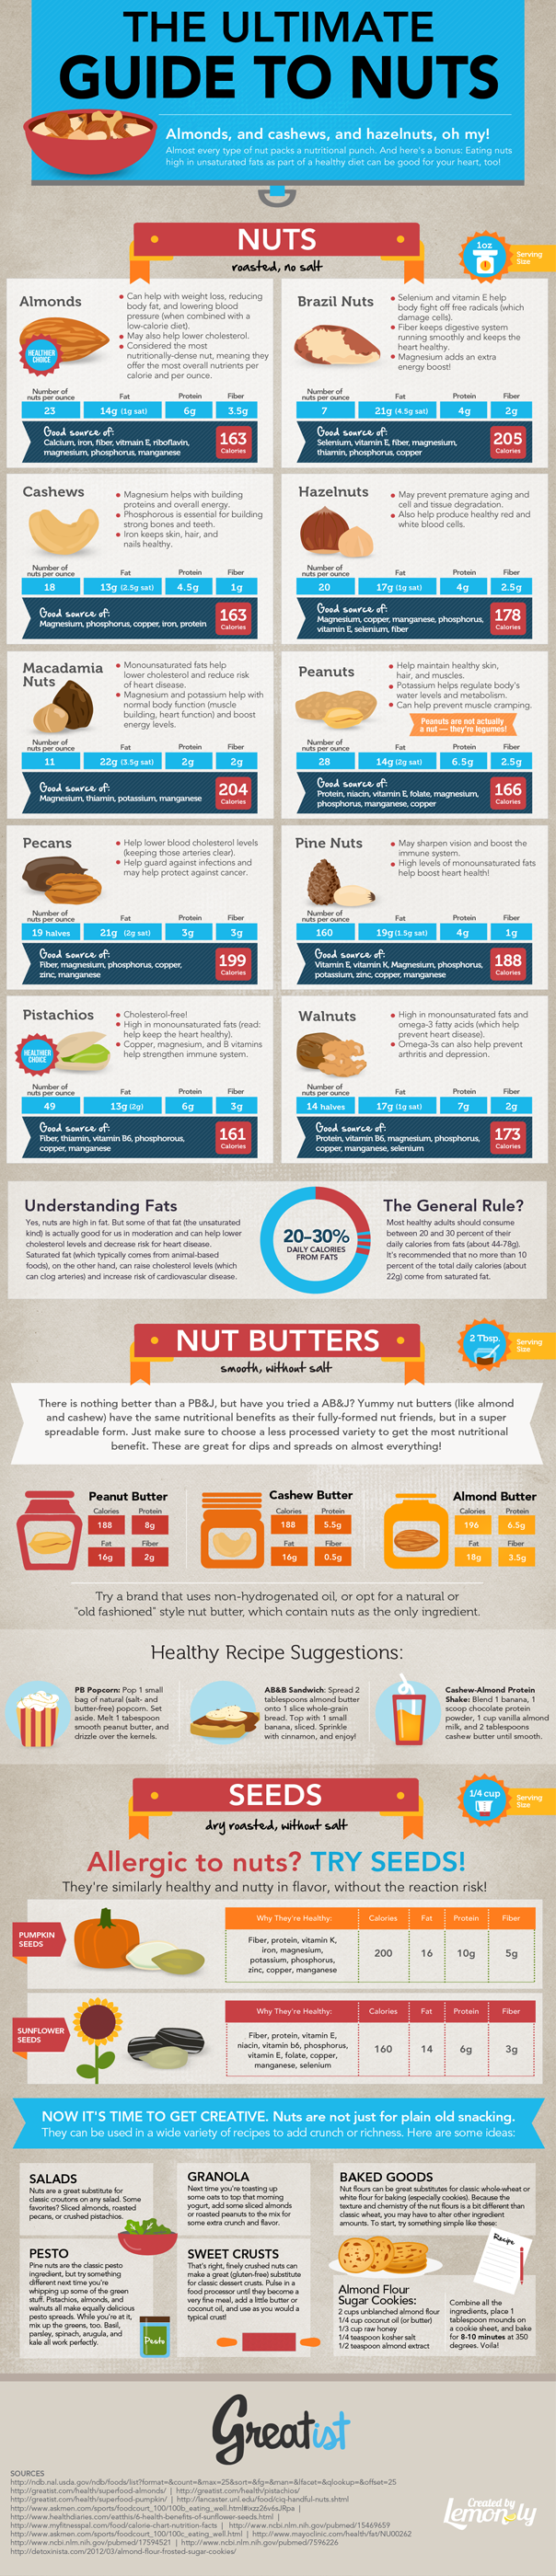 The Nut Guide